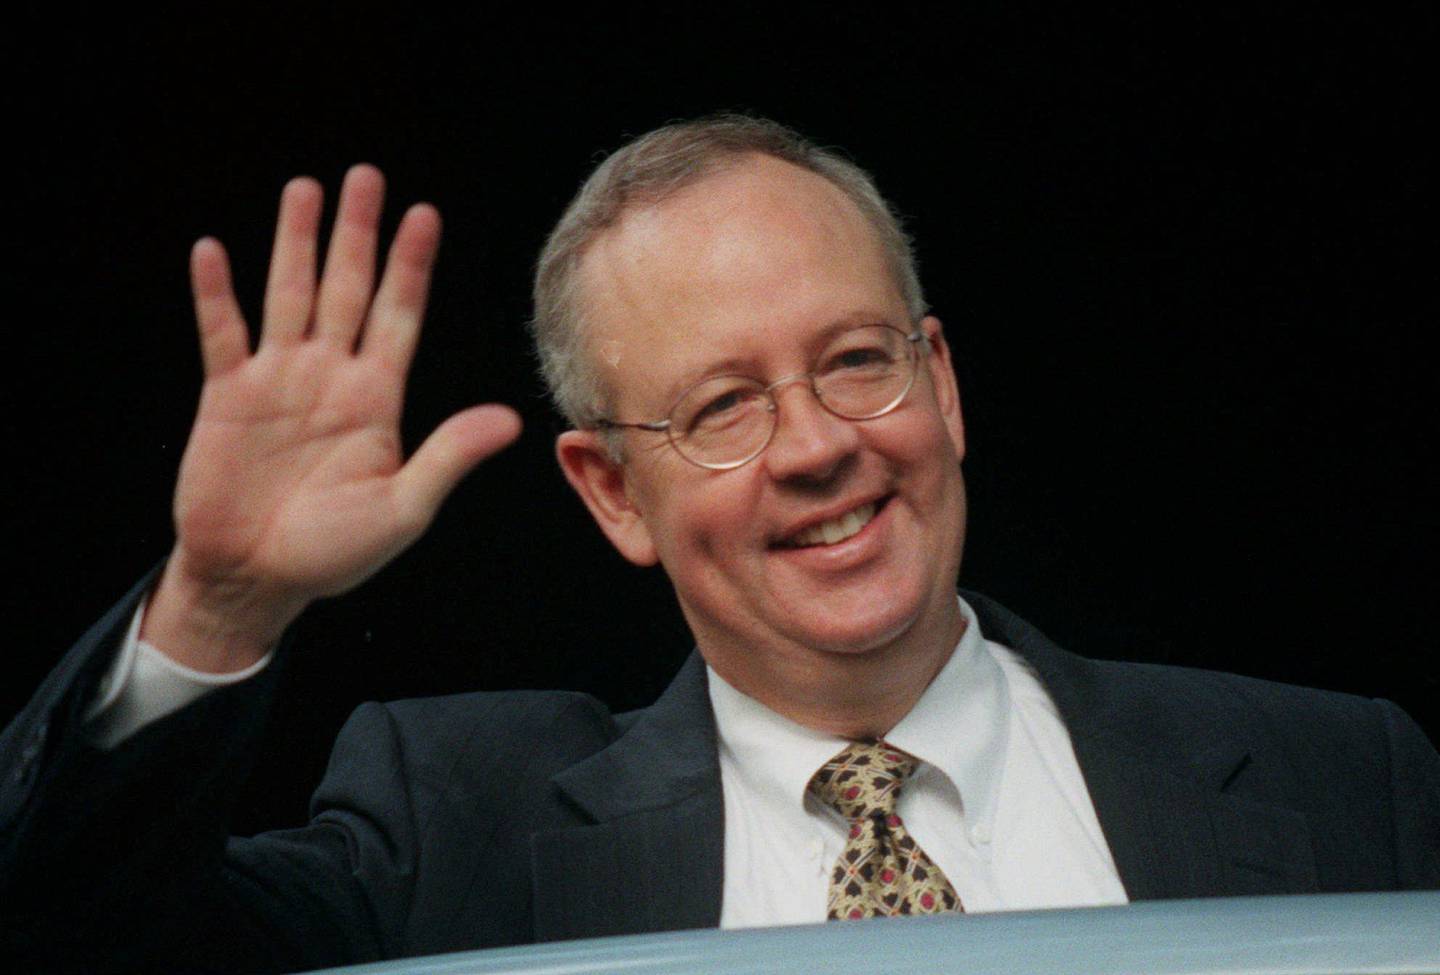 
Special prosecutor Ken Starr waves as he enters his car outside his home in McLean, Va. Thursday July 16, 1998. President Clinton's Secret Service lead agent, Larry Cockell has entered the Federal Court in Washington to appear before the grand jury under subpoena to testify in the Monica Lewinsky investigation. (AP Photo/Khue Bui)